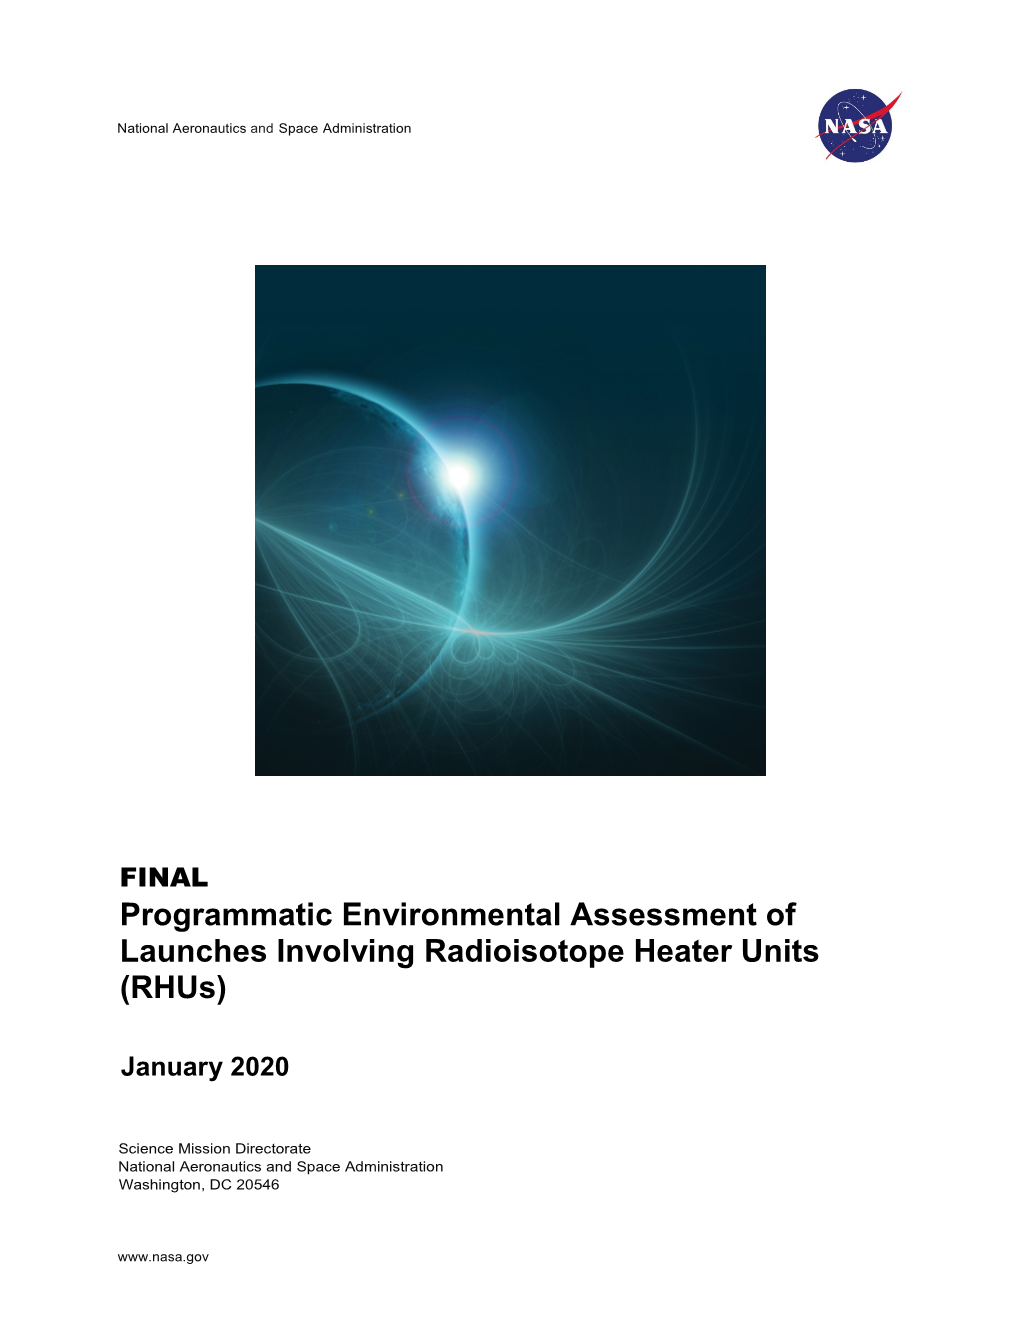 Programmatic Environmental Assessment of Launches Involving Radioisotope Heater Units (Rhus)